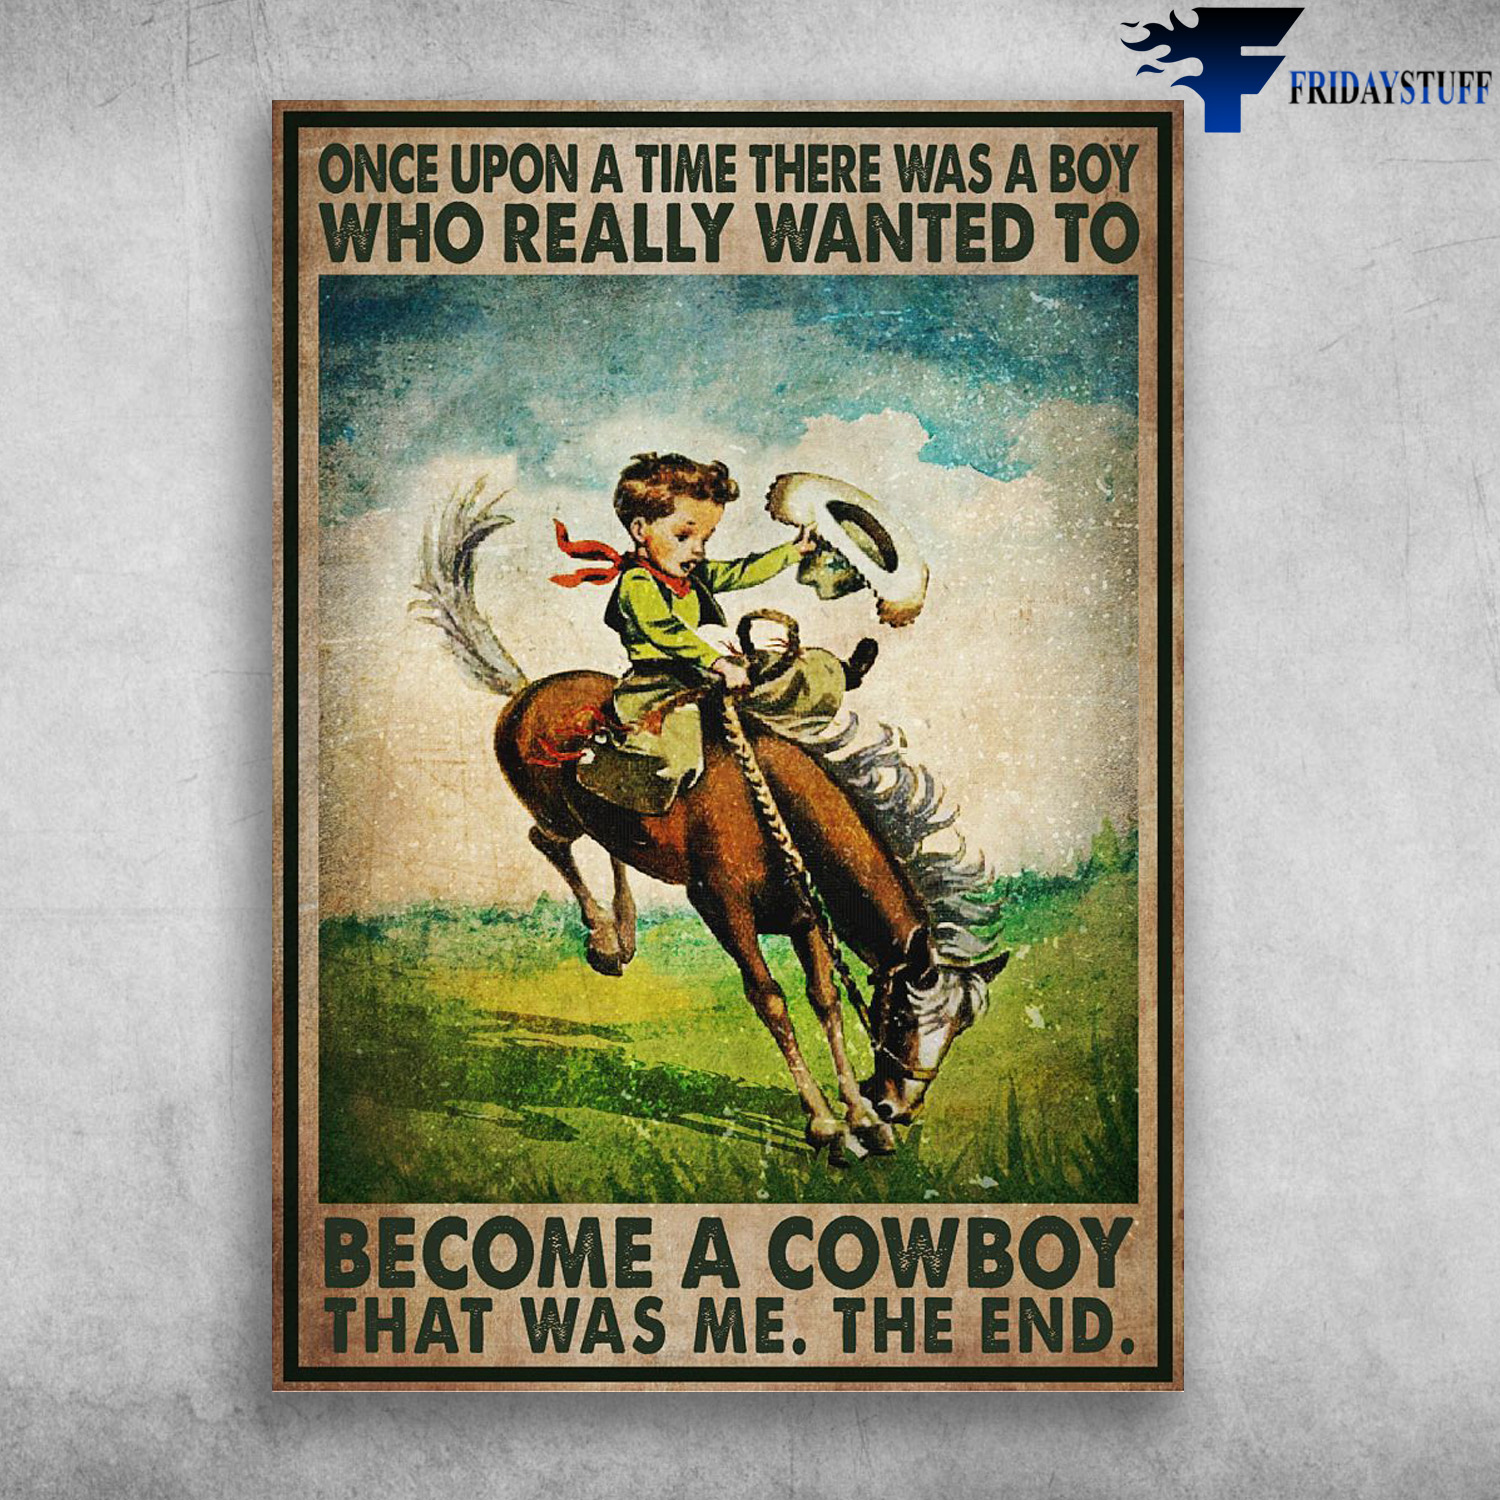 Young Cowboy, Riding Horse - Once Upon A Time, There Was A Boy, Who Really Wanted To Become A Cowboy, That Was Me, The End